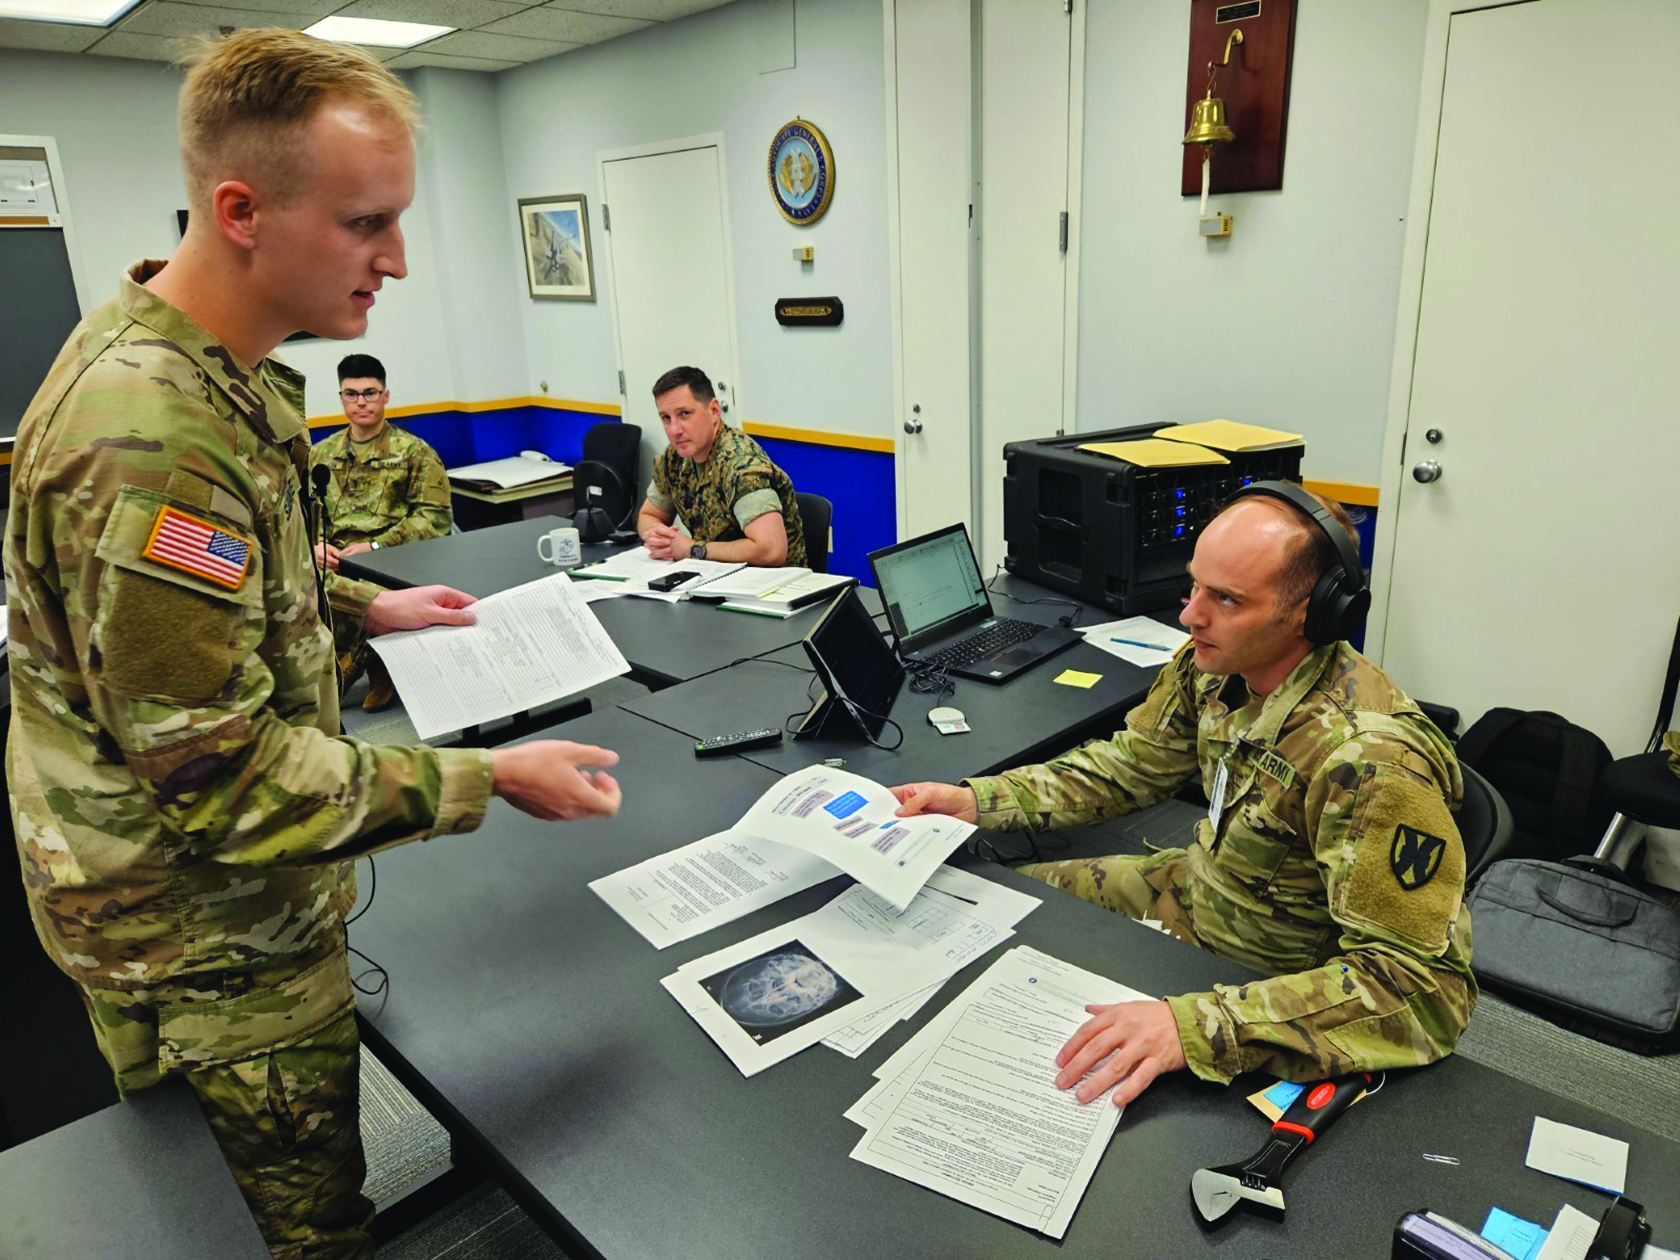 1LT Ethan Savage (standing, left), student in the 223d Officer Basic Course, hands exhibits to SSG Robert Zupa (seated, right), student in the 76th Basic Court Report Course, while participating in the U.S. v. Archer mock trial. The event included a mock guilty plea, military providence inquiry, and contested court-martial. (Credit: SSG Catherine Taylor)